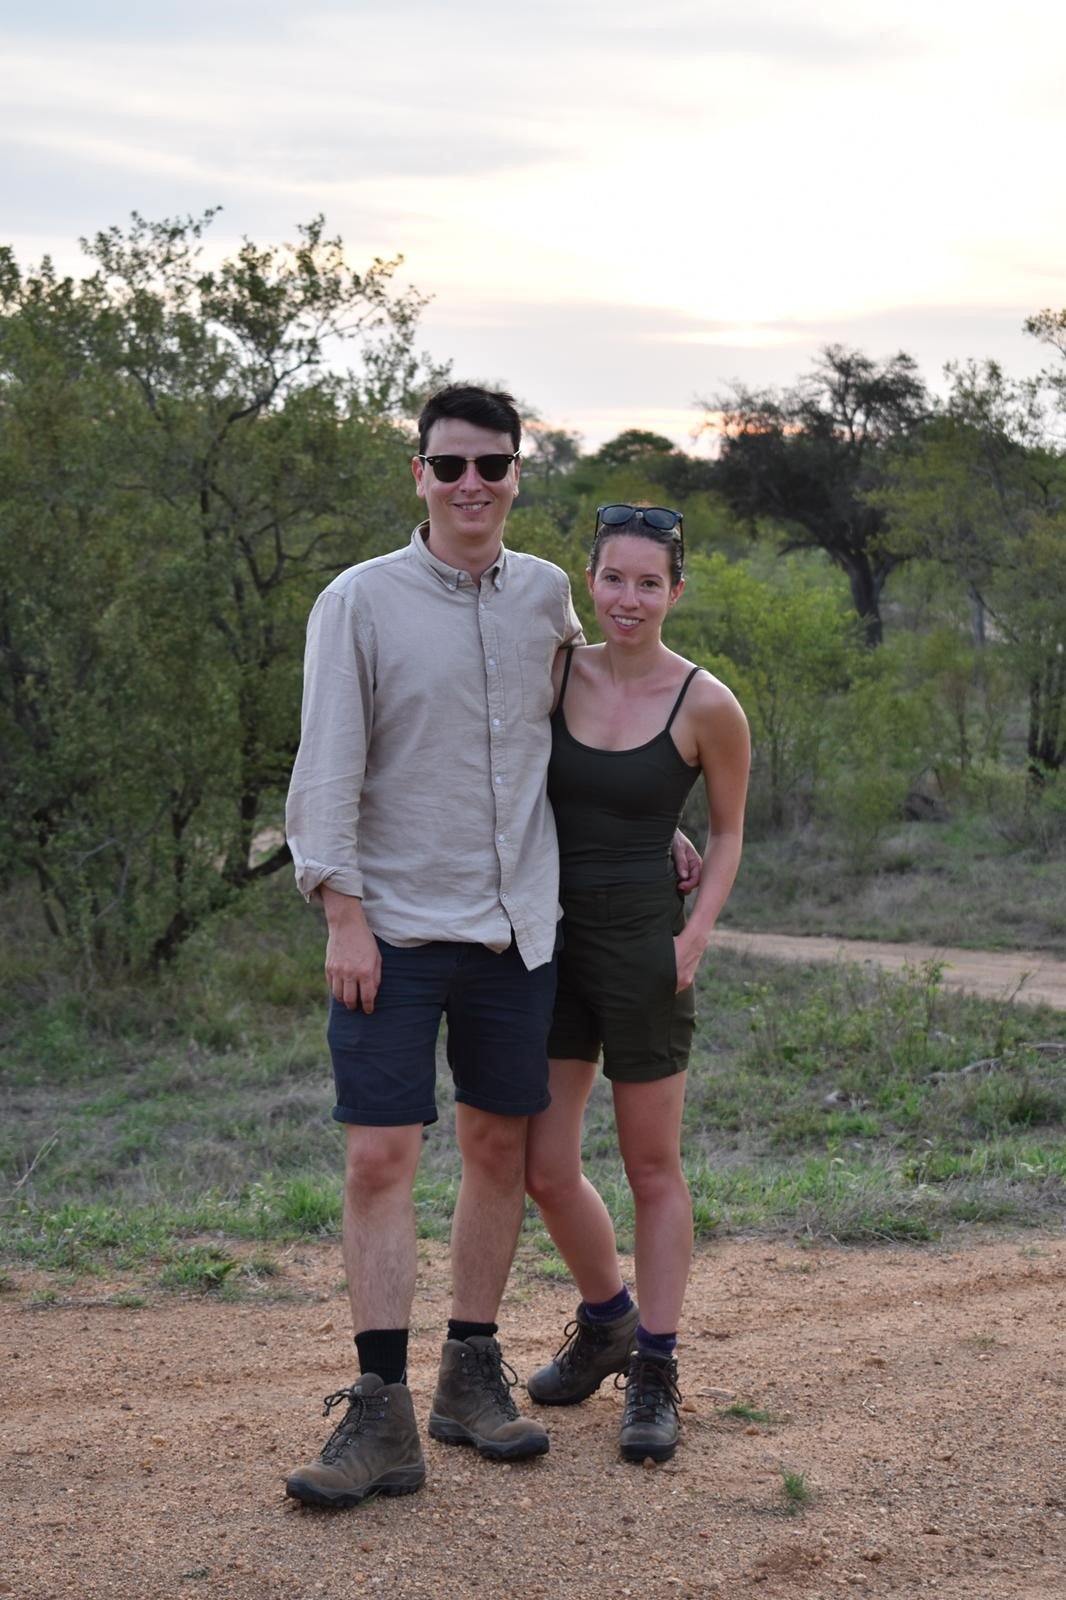 Photo of Roise Gibson and her partner in the South Africa wild.